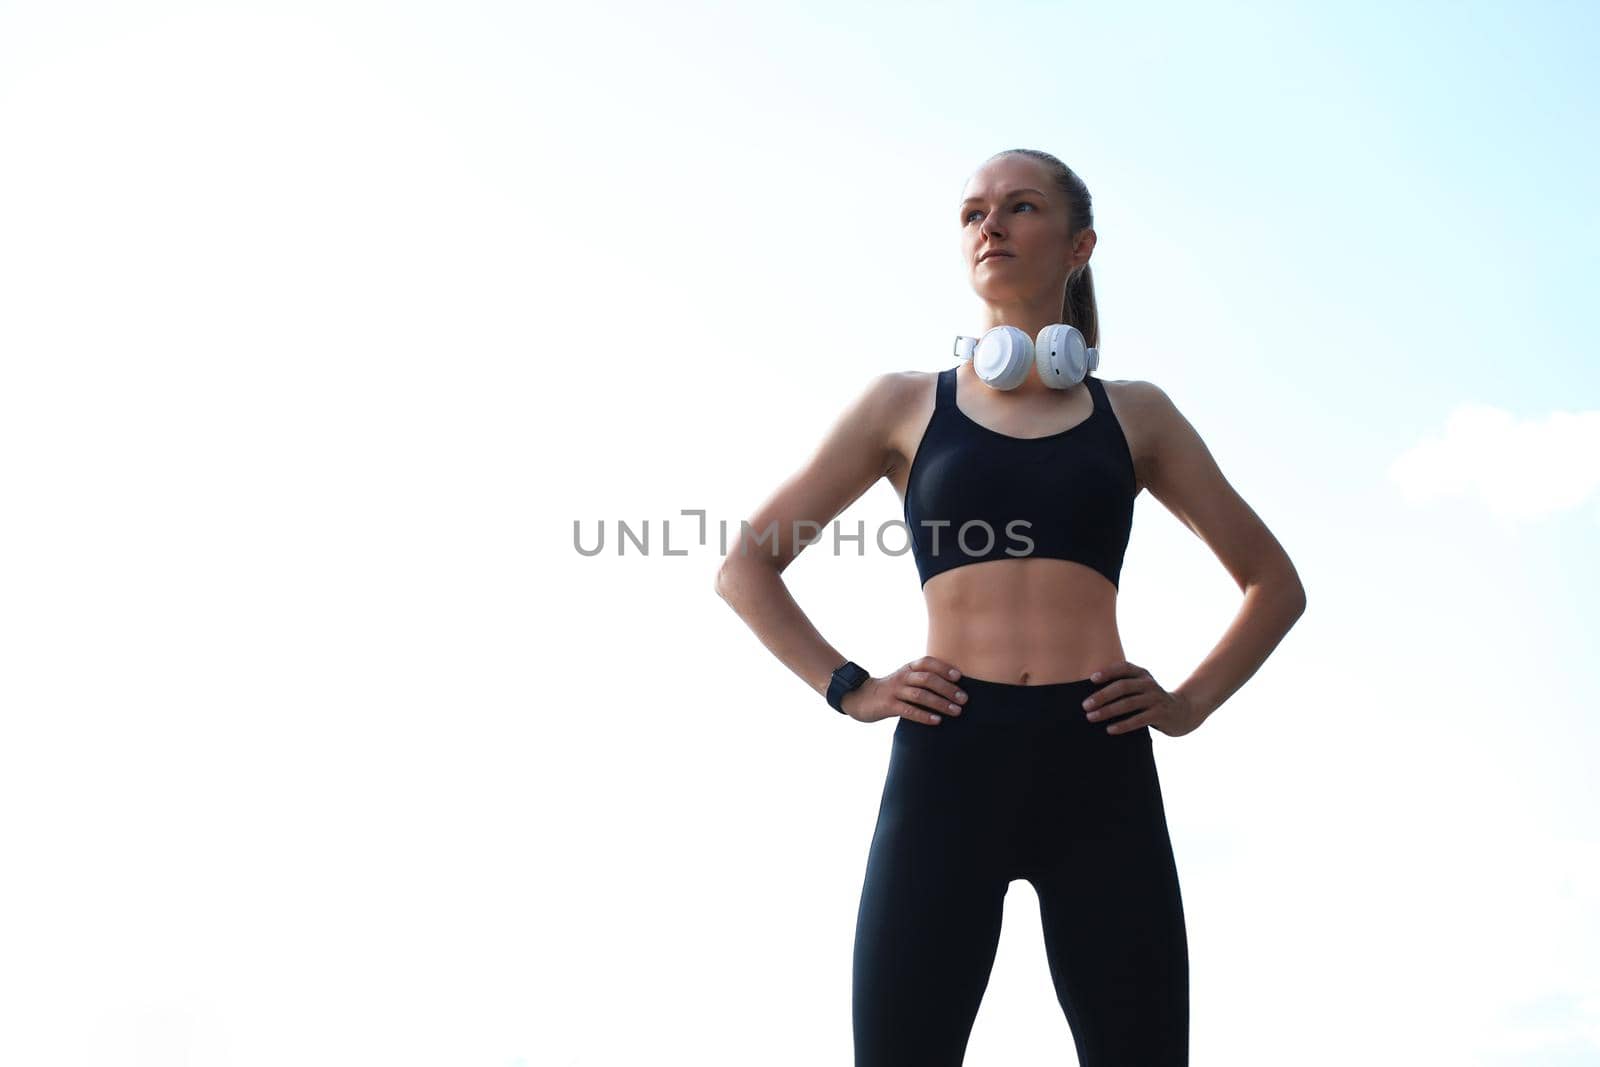 Beautiful woman in sports clothing and earphones looking aside from camera